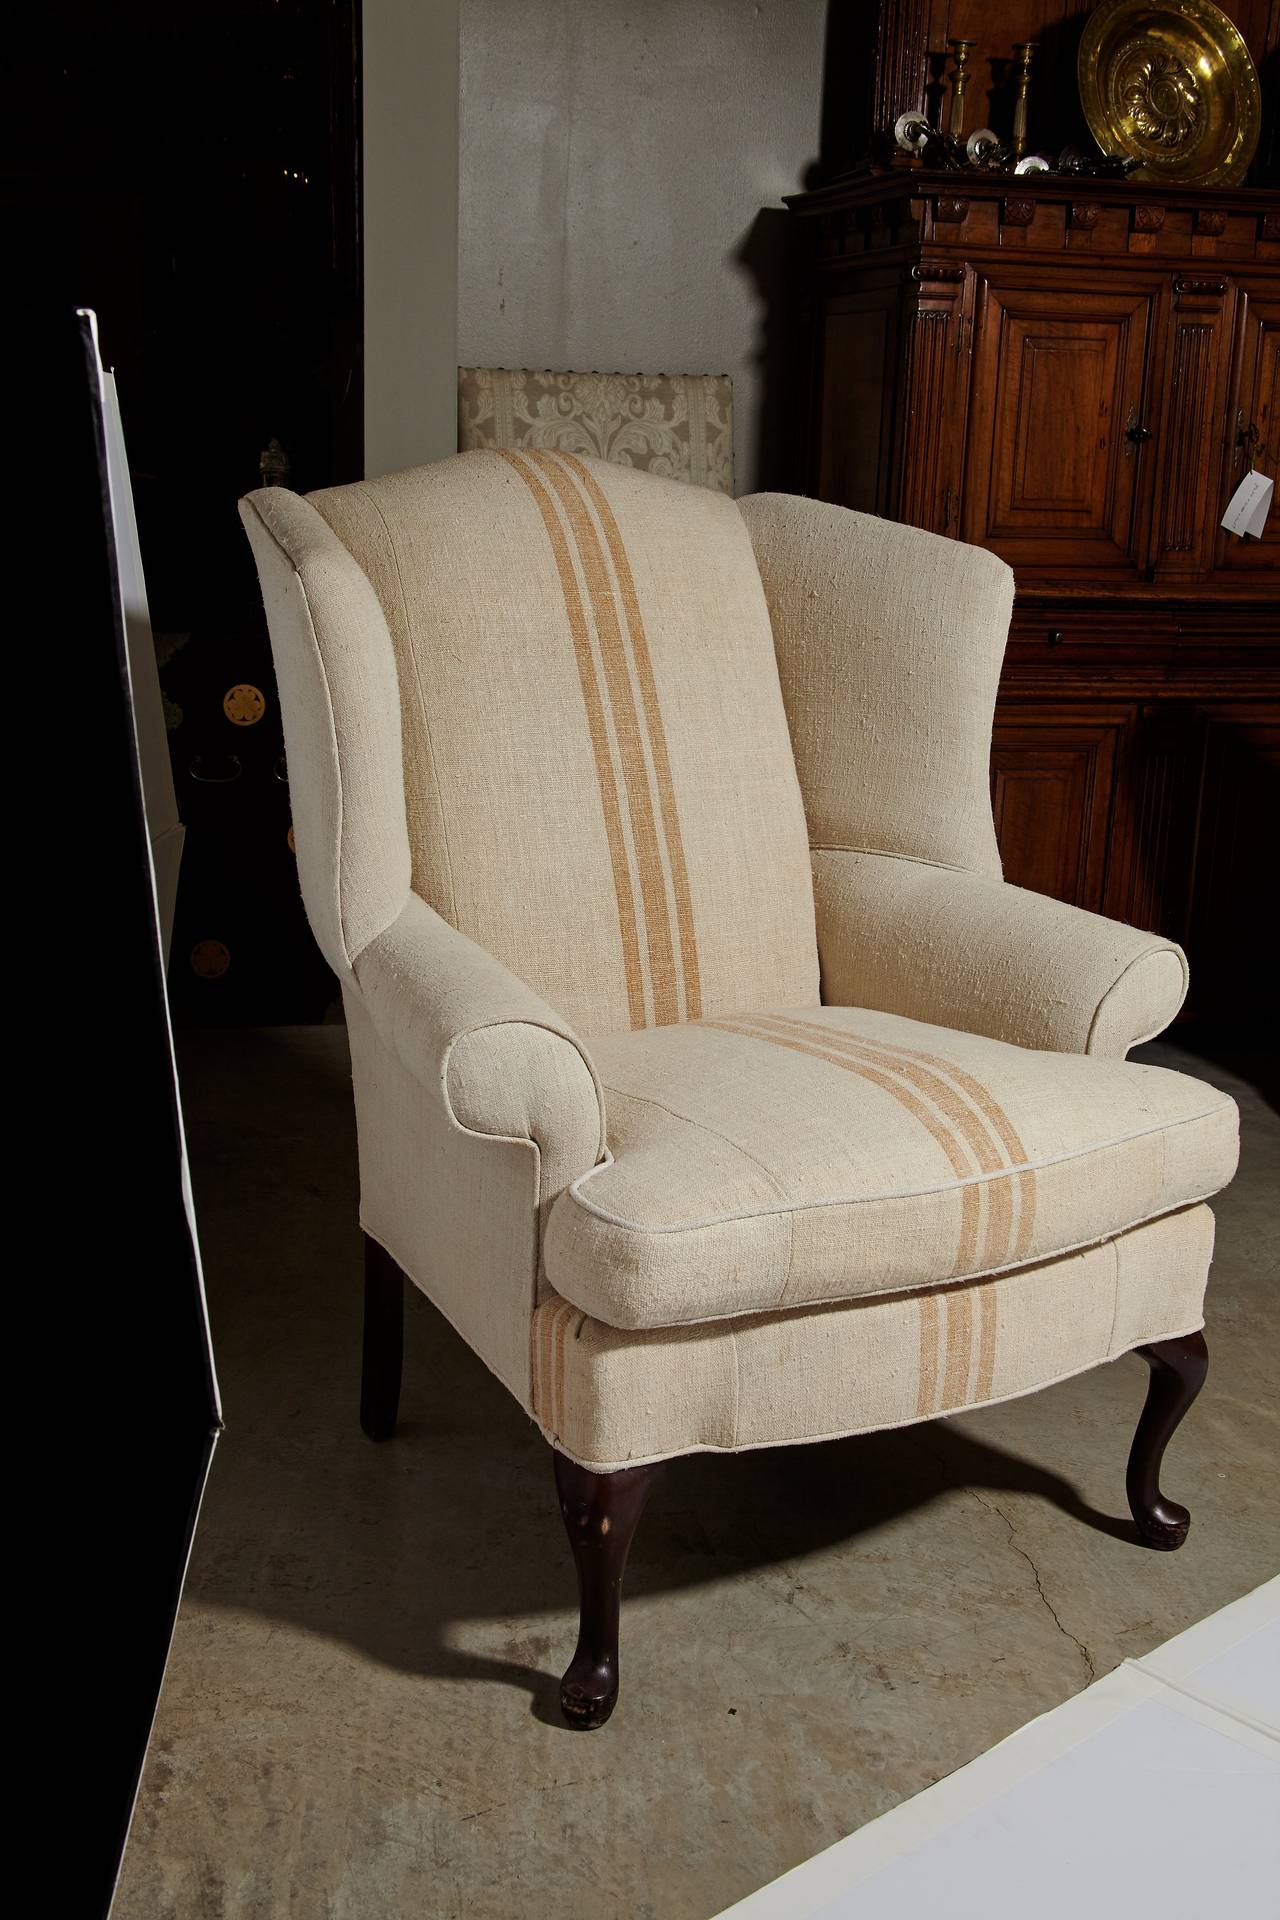 Wonderful pair of wingback chairs that have been upholstered in heavy weight antique homespun Belgian linen flax. circa 1900. Very clean, soft and in excellent condition. The fabric has three umber colored stripes running down the center of the